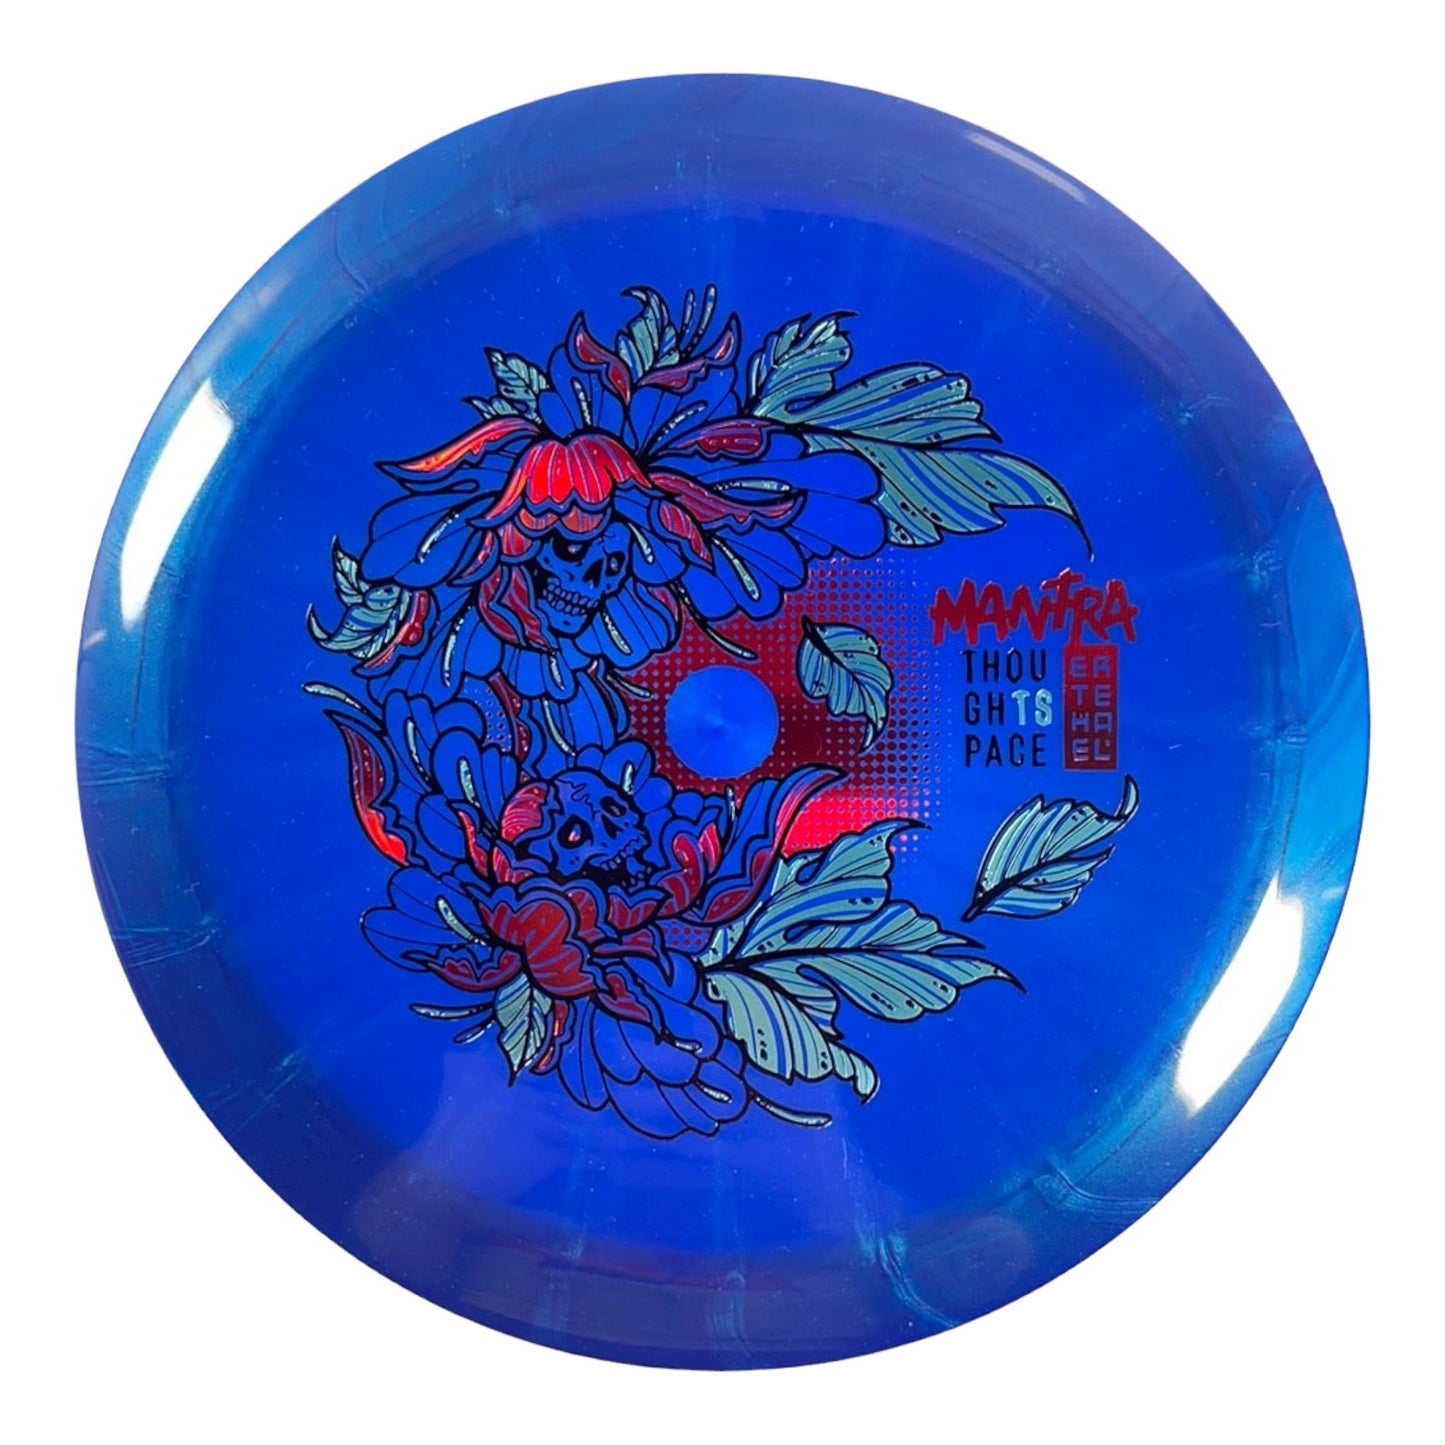 Thought Space Athletics Mantra | Ethereal | Blue/Red 173g Disc Golf